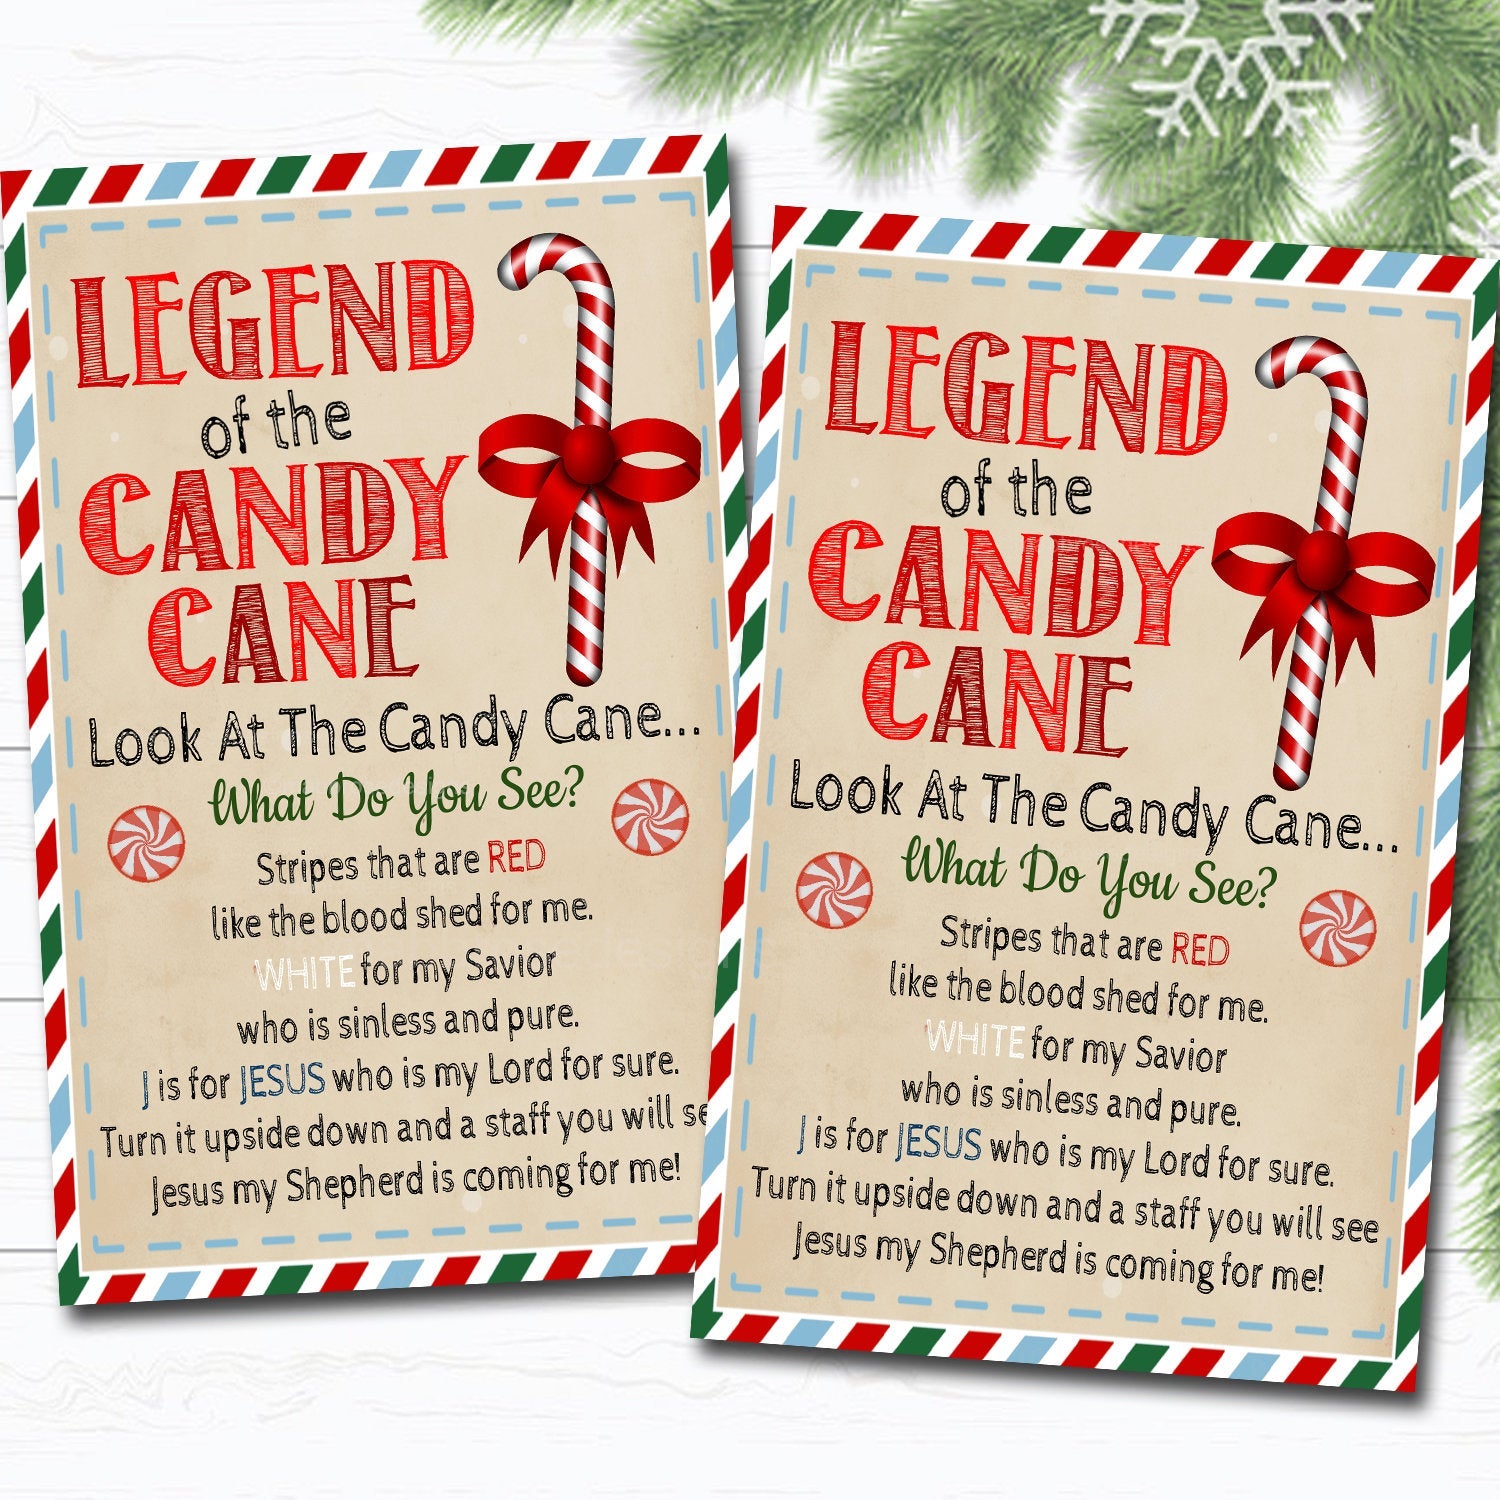 legend-of-the-candy-cane-tags-christmas-teacher-student-gifts-jesus